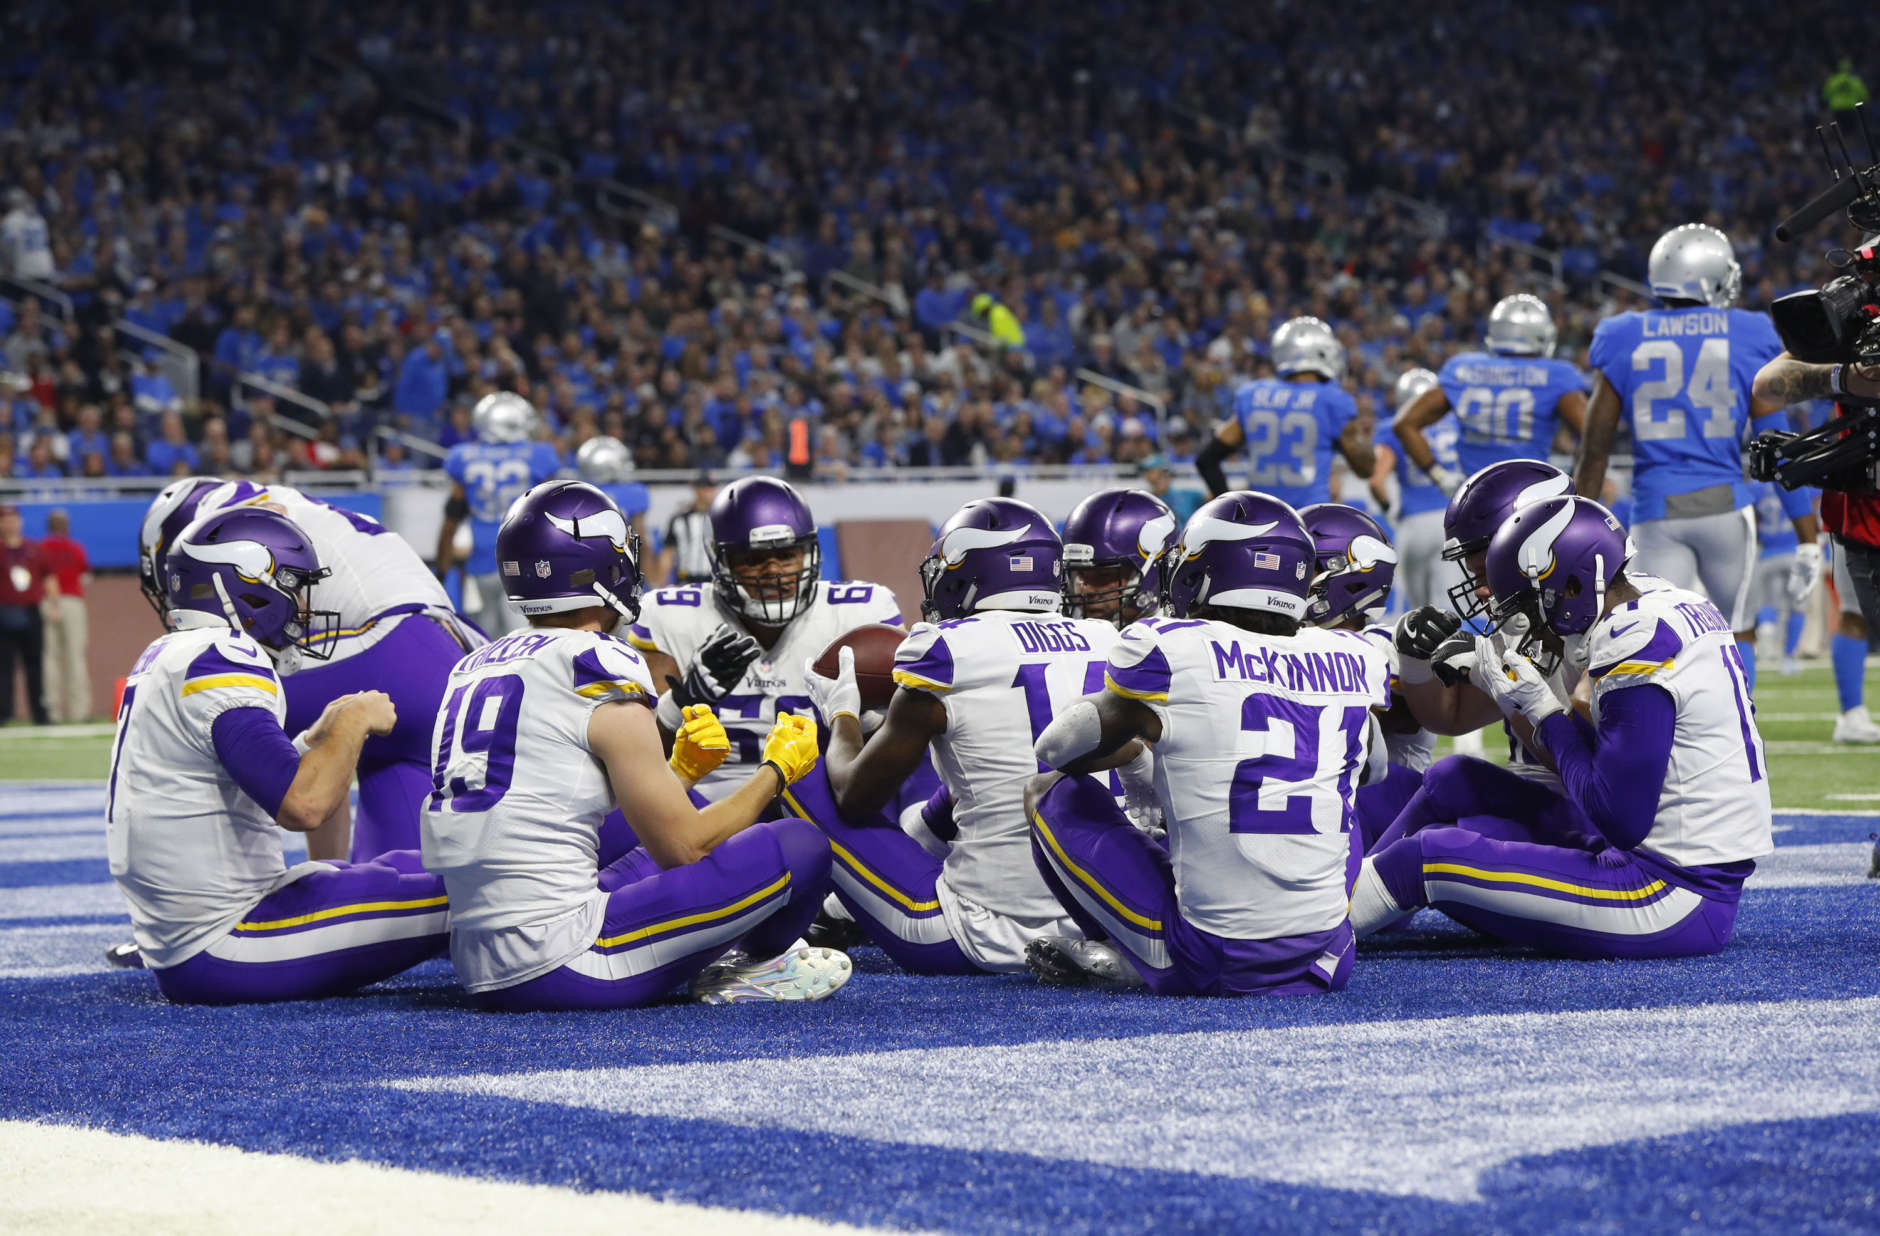 Minnesota Vikings players celebrate a Case Keenum touchdown by pretending to have Thanksgiving dinner in the end zone against the Detroit Lions during an NFL football game in Detroit, Thursday, Nov. 23, 2017. (AP Photo/Paul Sancya)